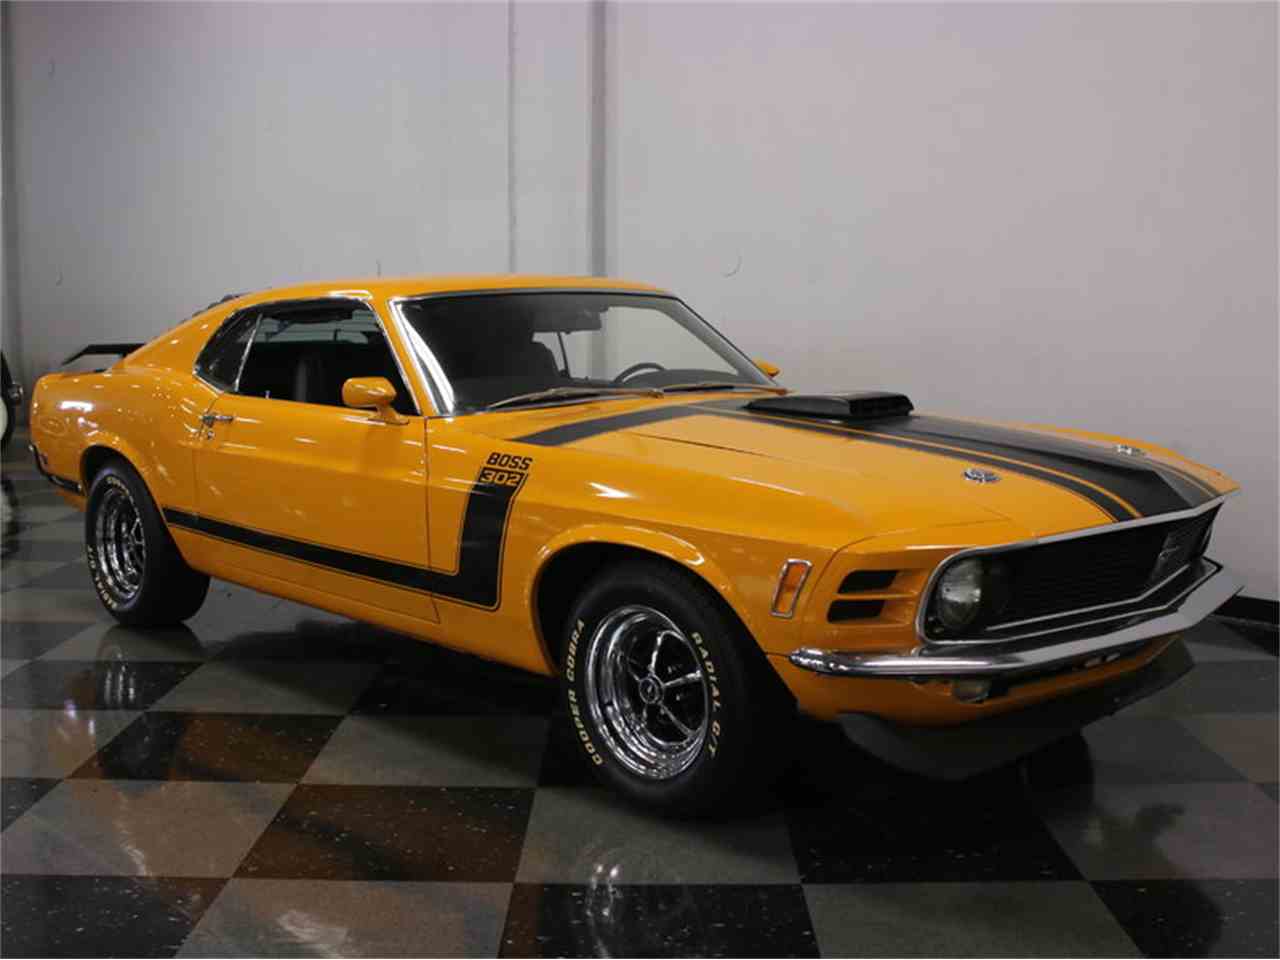 1970 Ford Mustang Boss 302 Tribute for Sale | ClassicCars.com | CC-897368